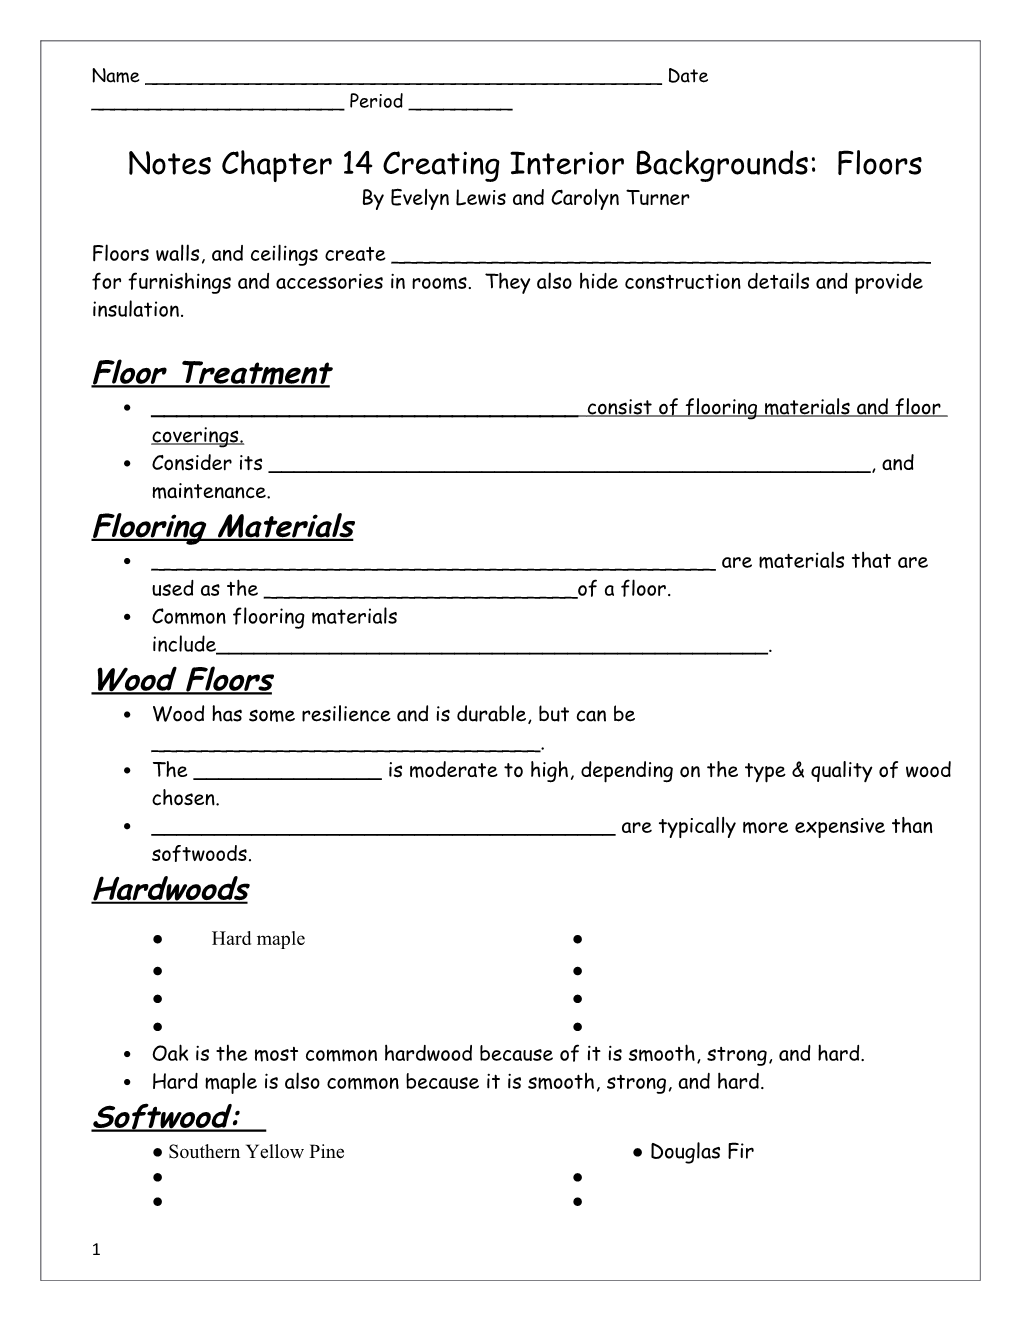 Notes Chapter 14 Creating Interior Backgrounds: Floors